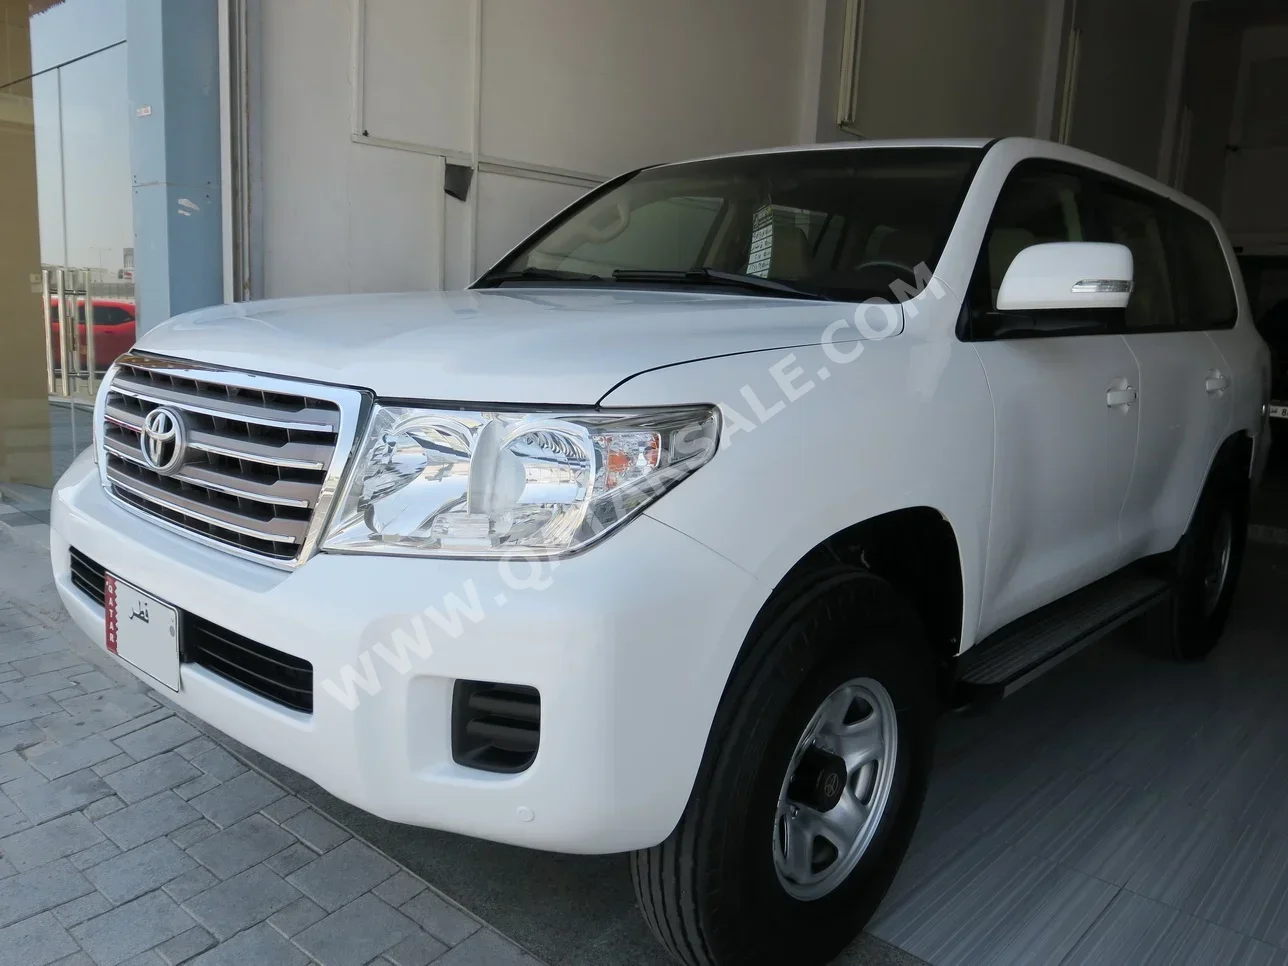 Toyota  Land Cruiser  G  2015  Automatic  241,000 Km  6 Cylinder  Four Wheel Drive (4WD)  SUV  White